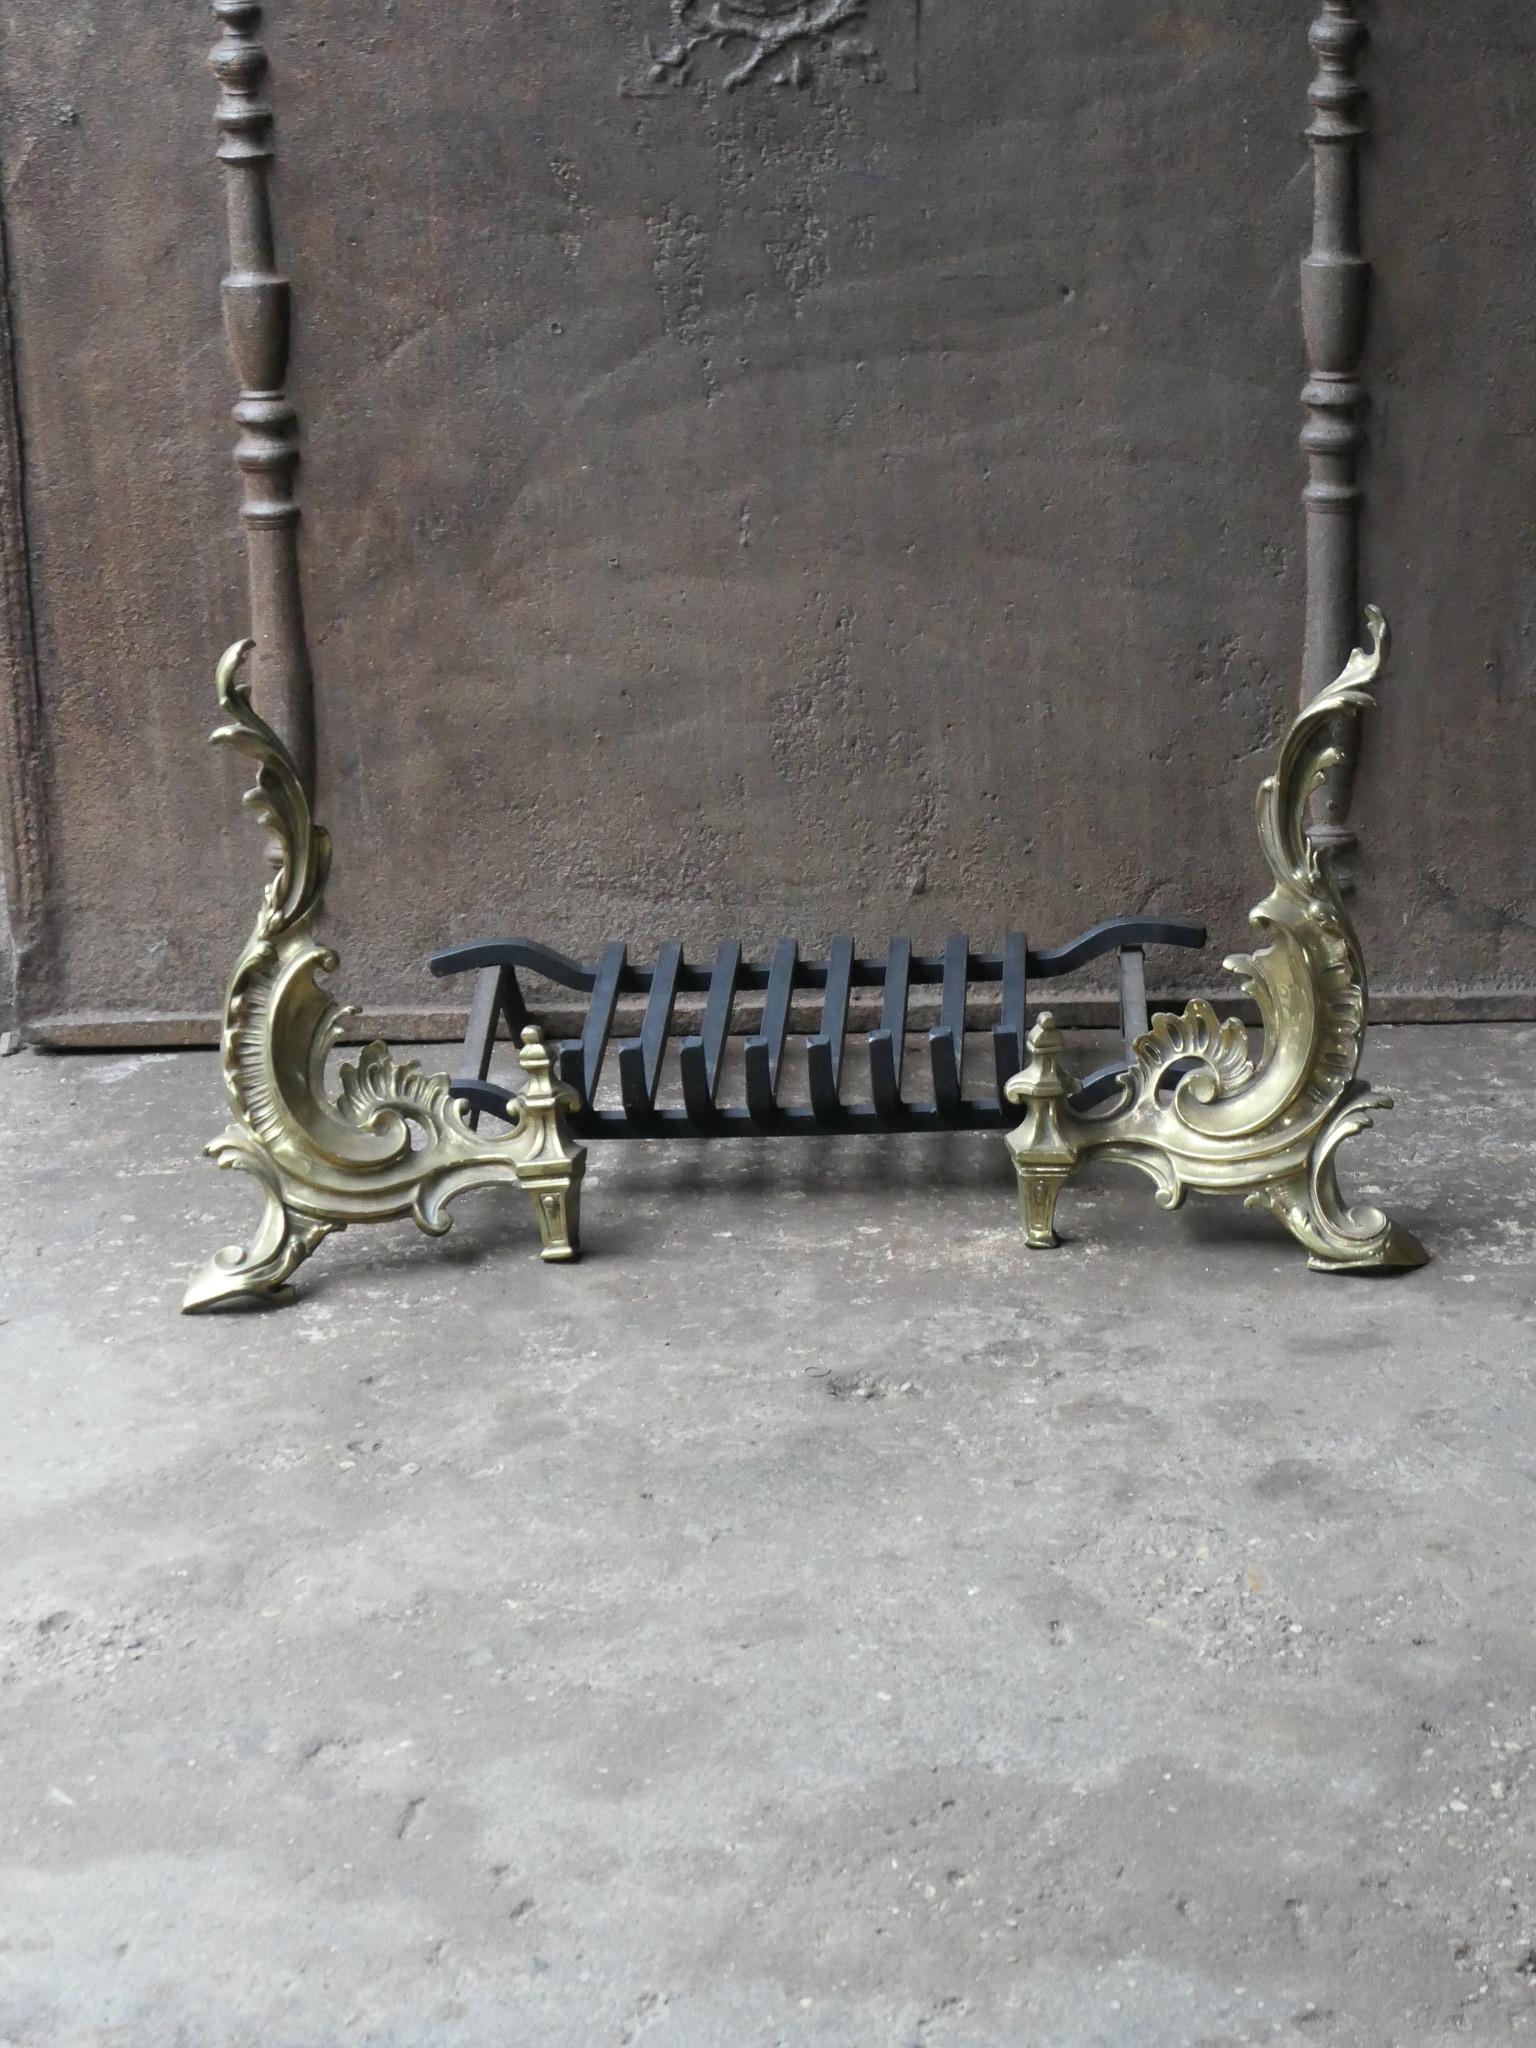 20th century French Louis XIV style fireplace basket - fire basket made of brass and wrought iron. The total width of the front is 30.7 inch (78.0 cm)

The basket is in a good condition and is fully functional.